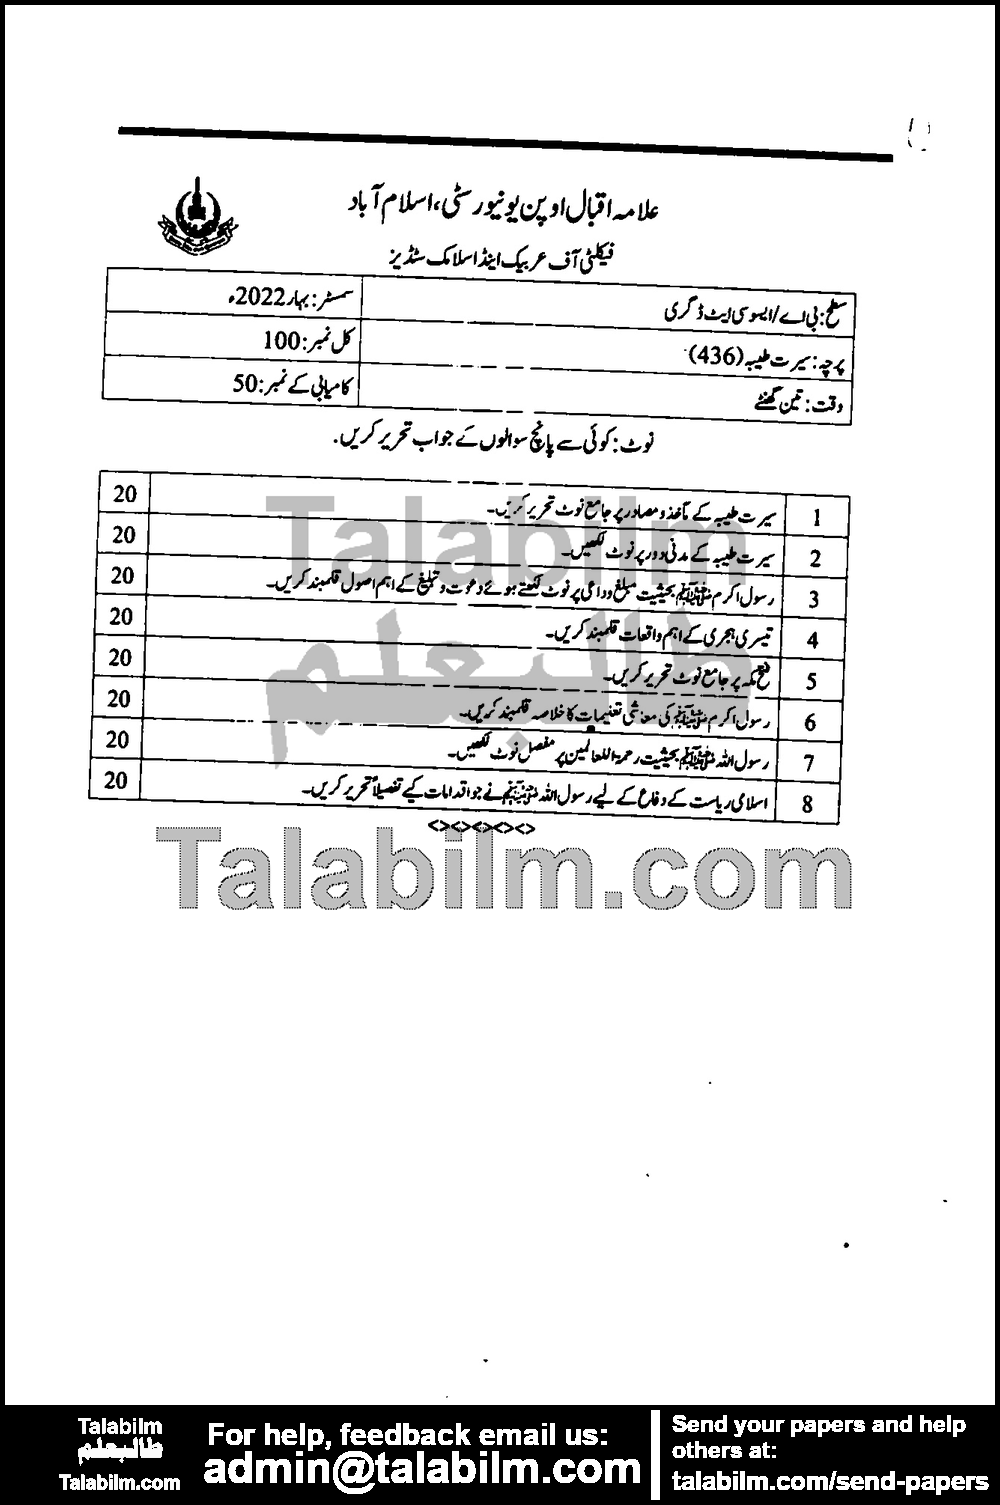 Seerat-e-Tayyaba 436 past paper for Spring 2022